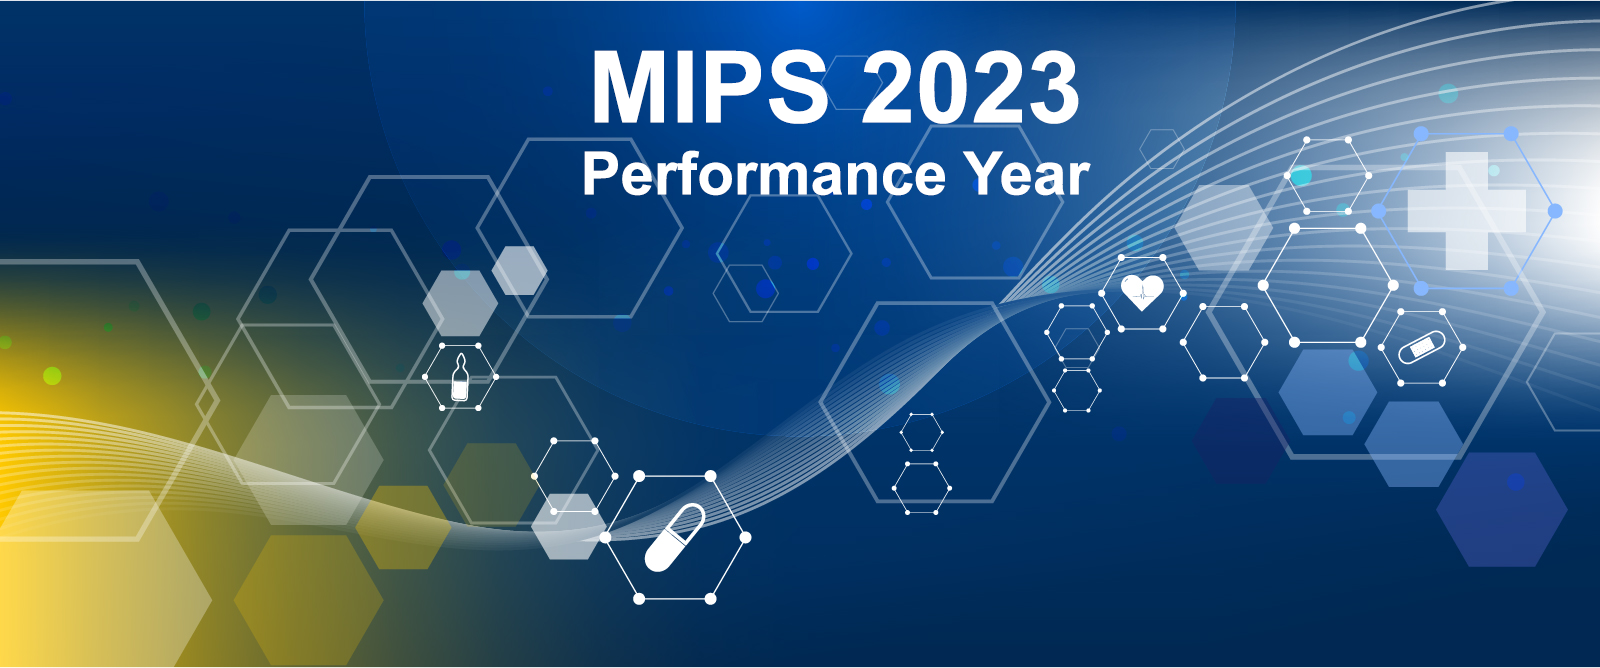 MIPS 2023